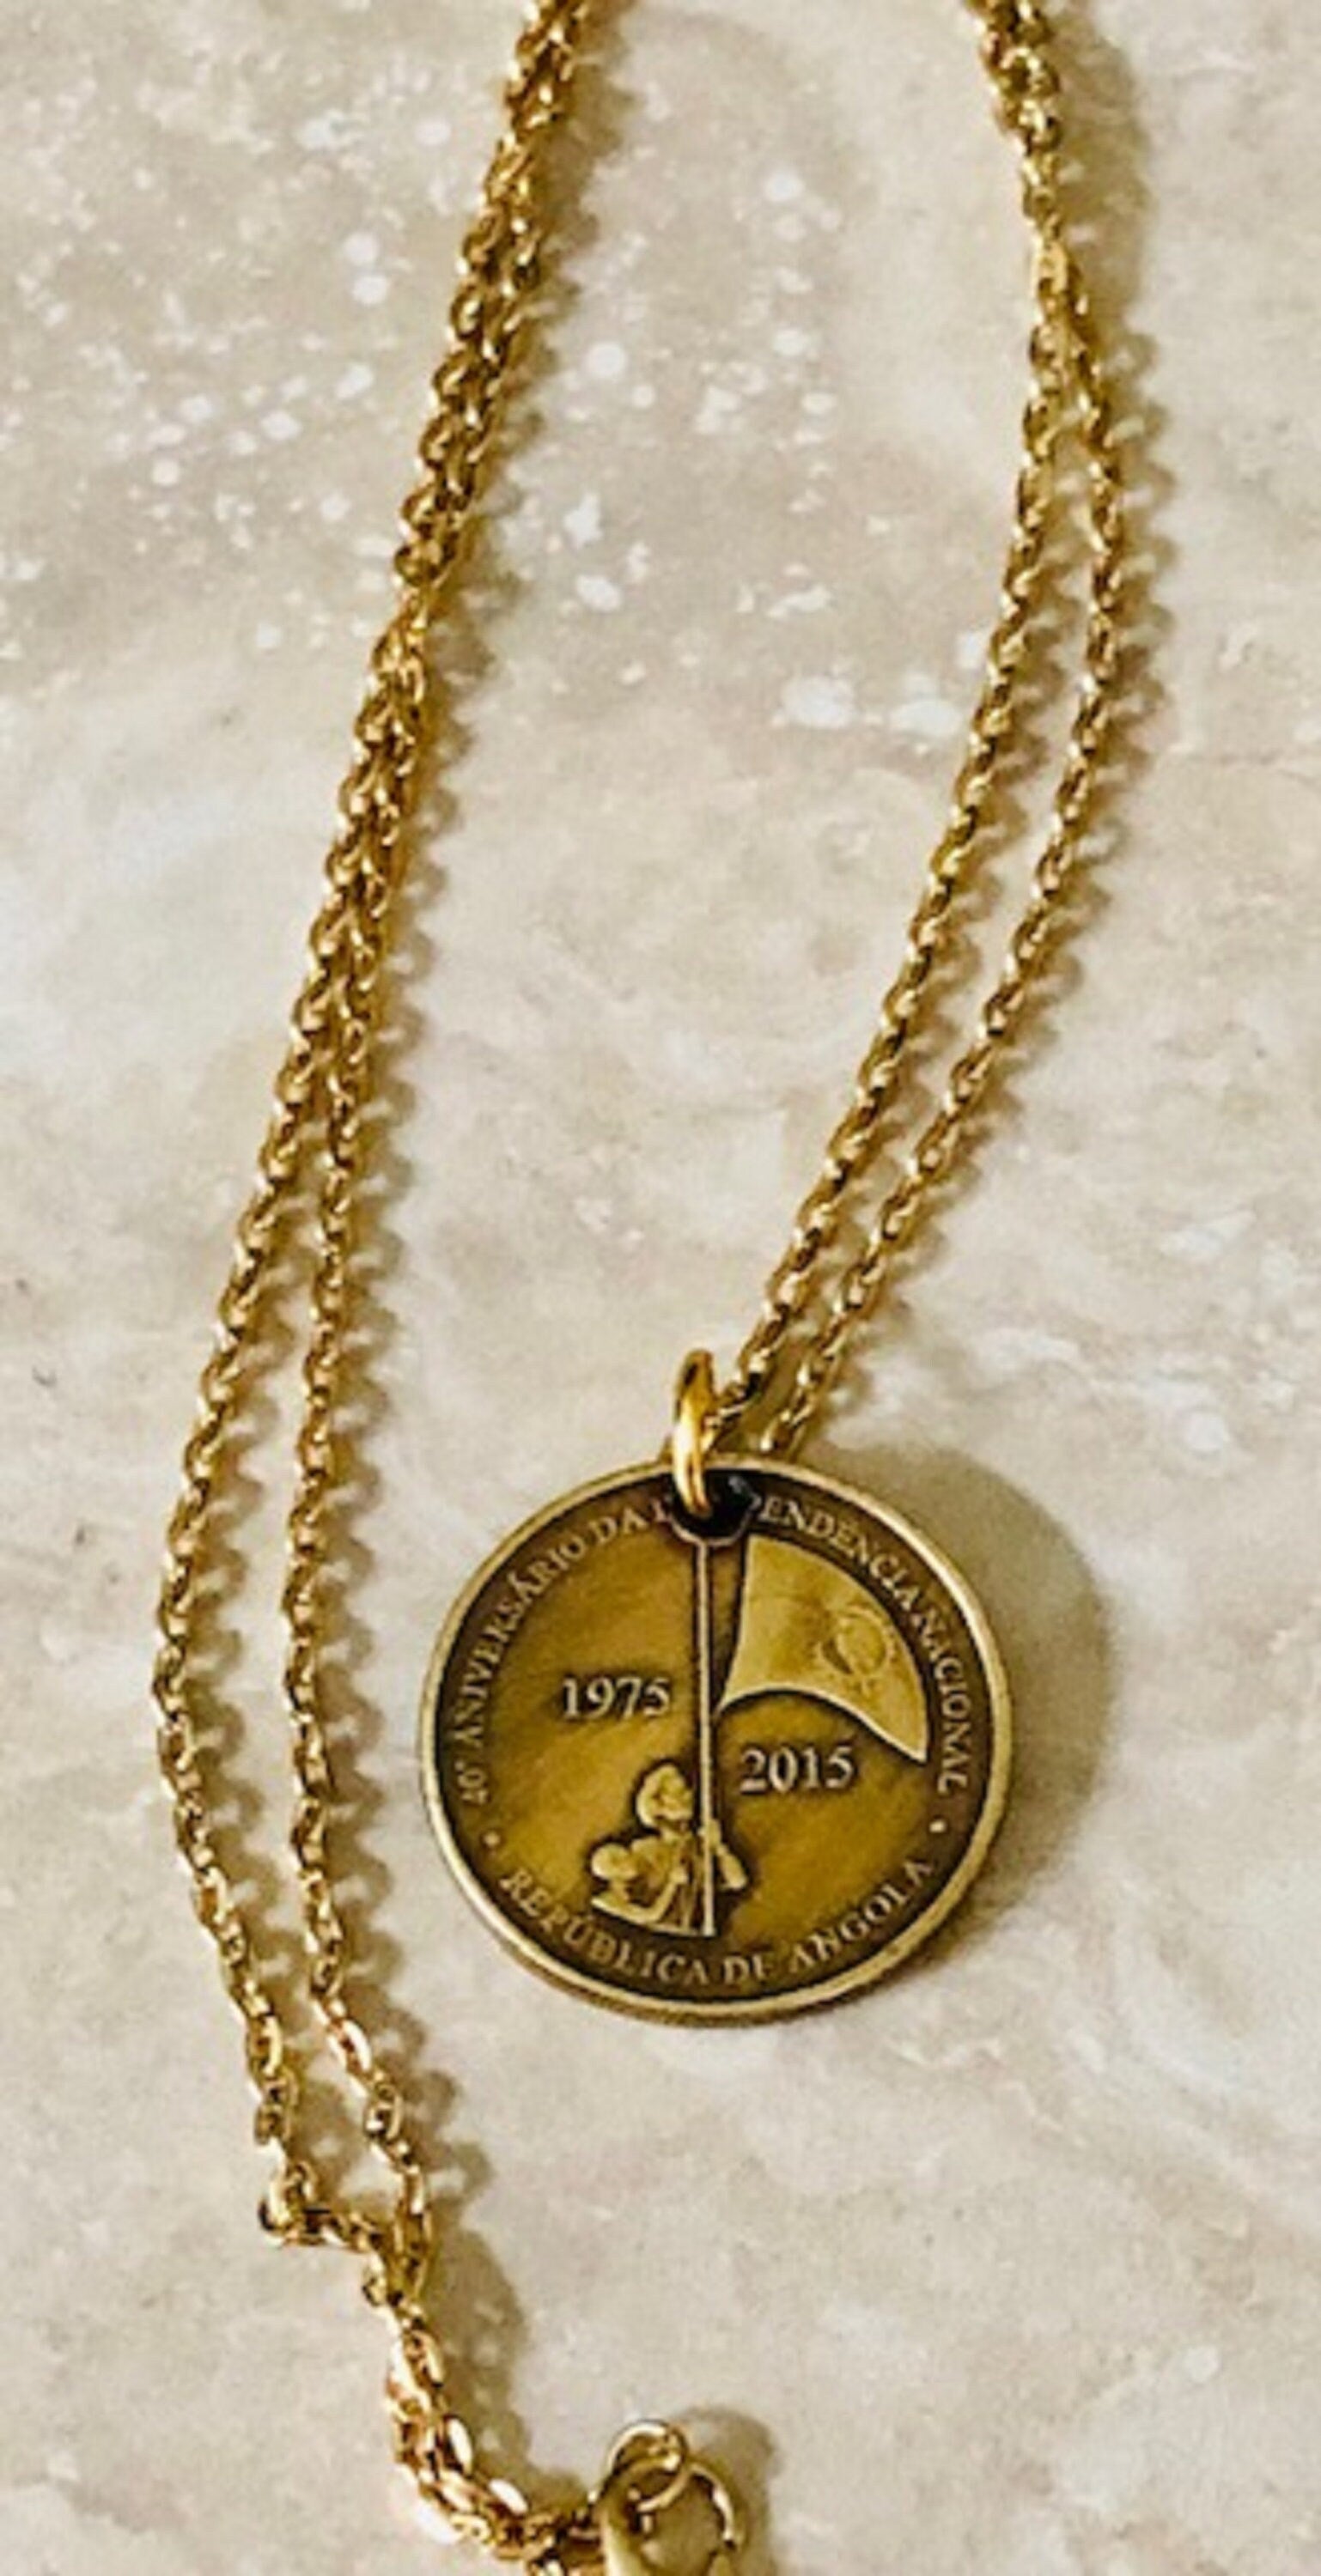 Angola Coin Necklace African 100 Kwanzas Pendant Personal Old Vintage Handmade Jewelry Gift Friend Charm For Him Her World Coin Collector